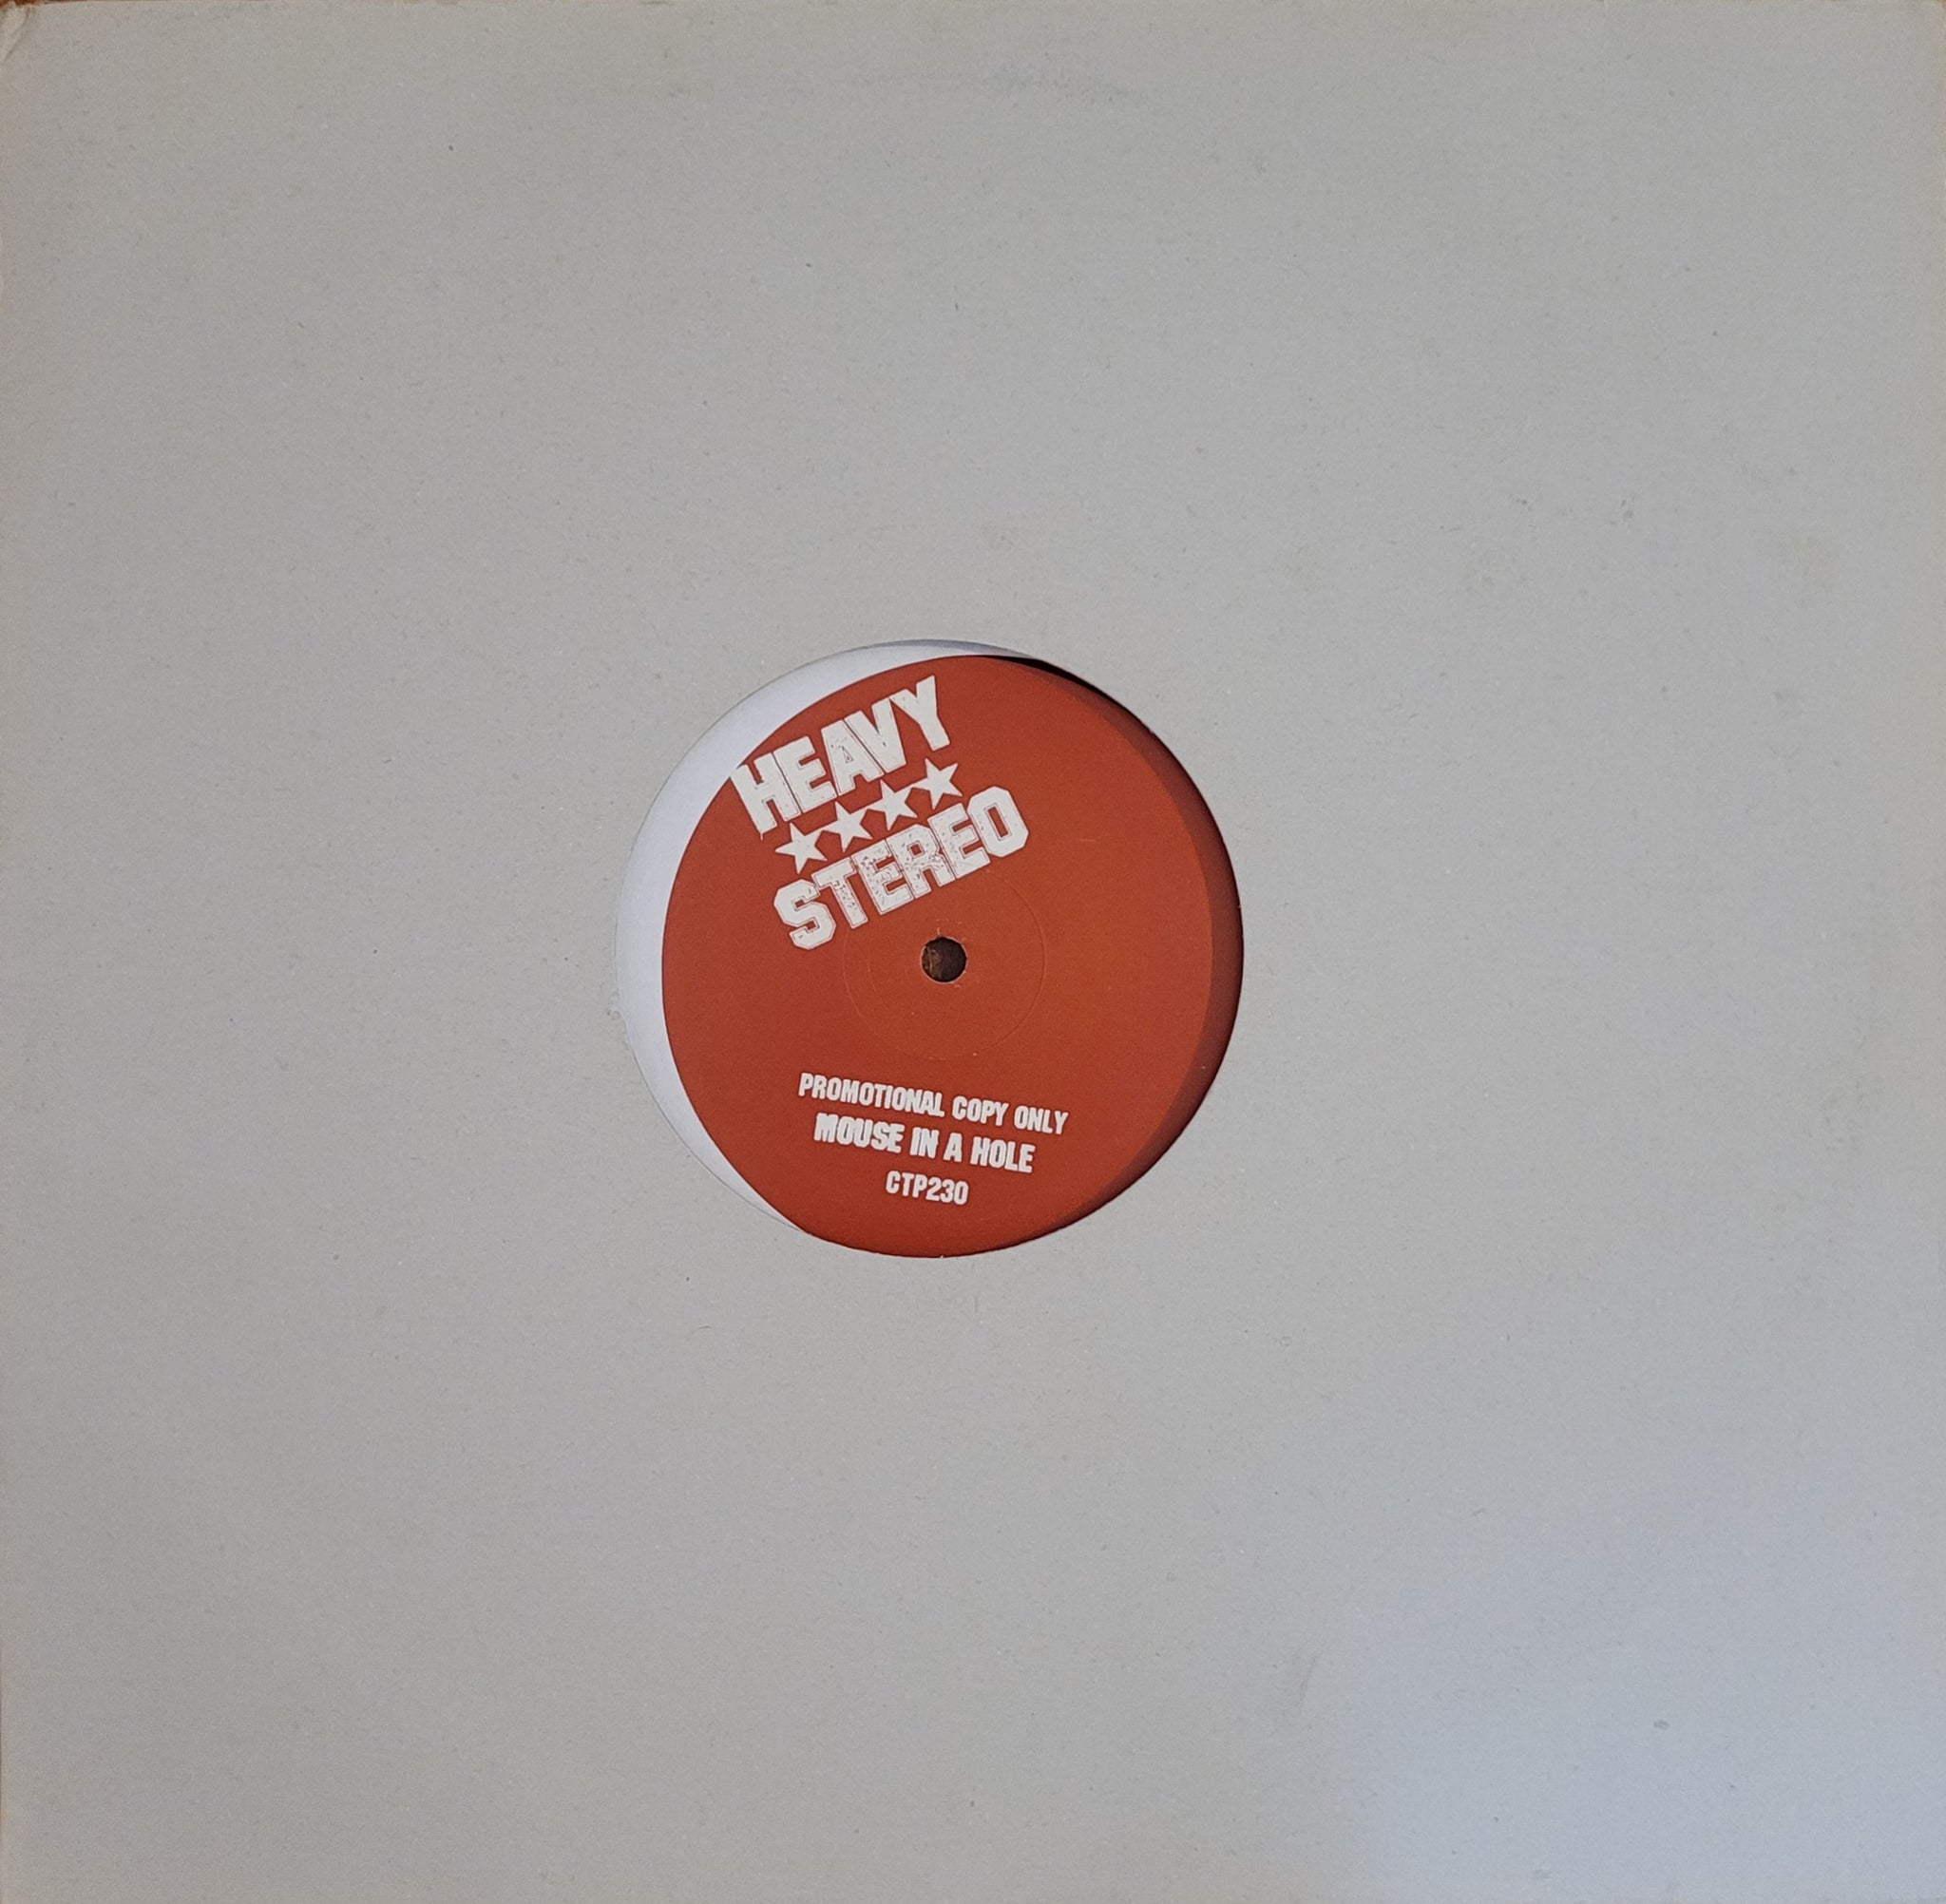 Heavy Stereo - Mouse In A Hole 12 Single (Promo)